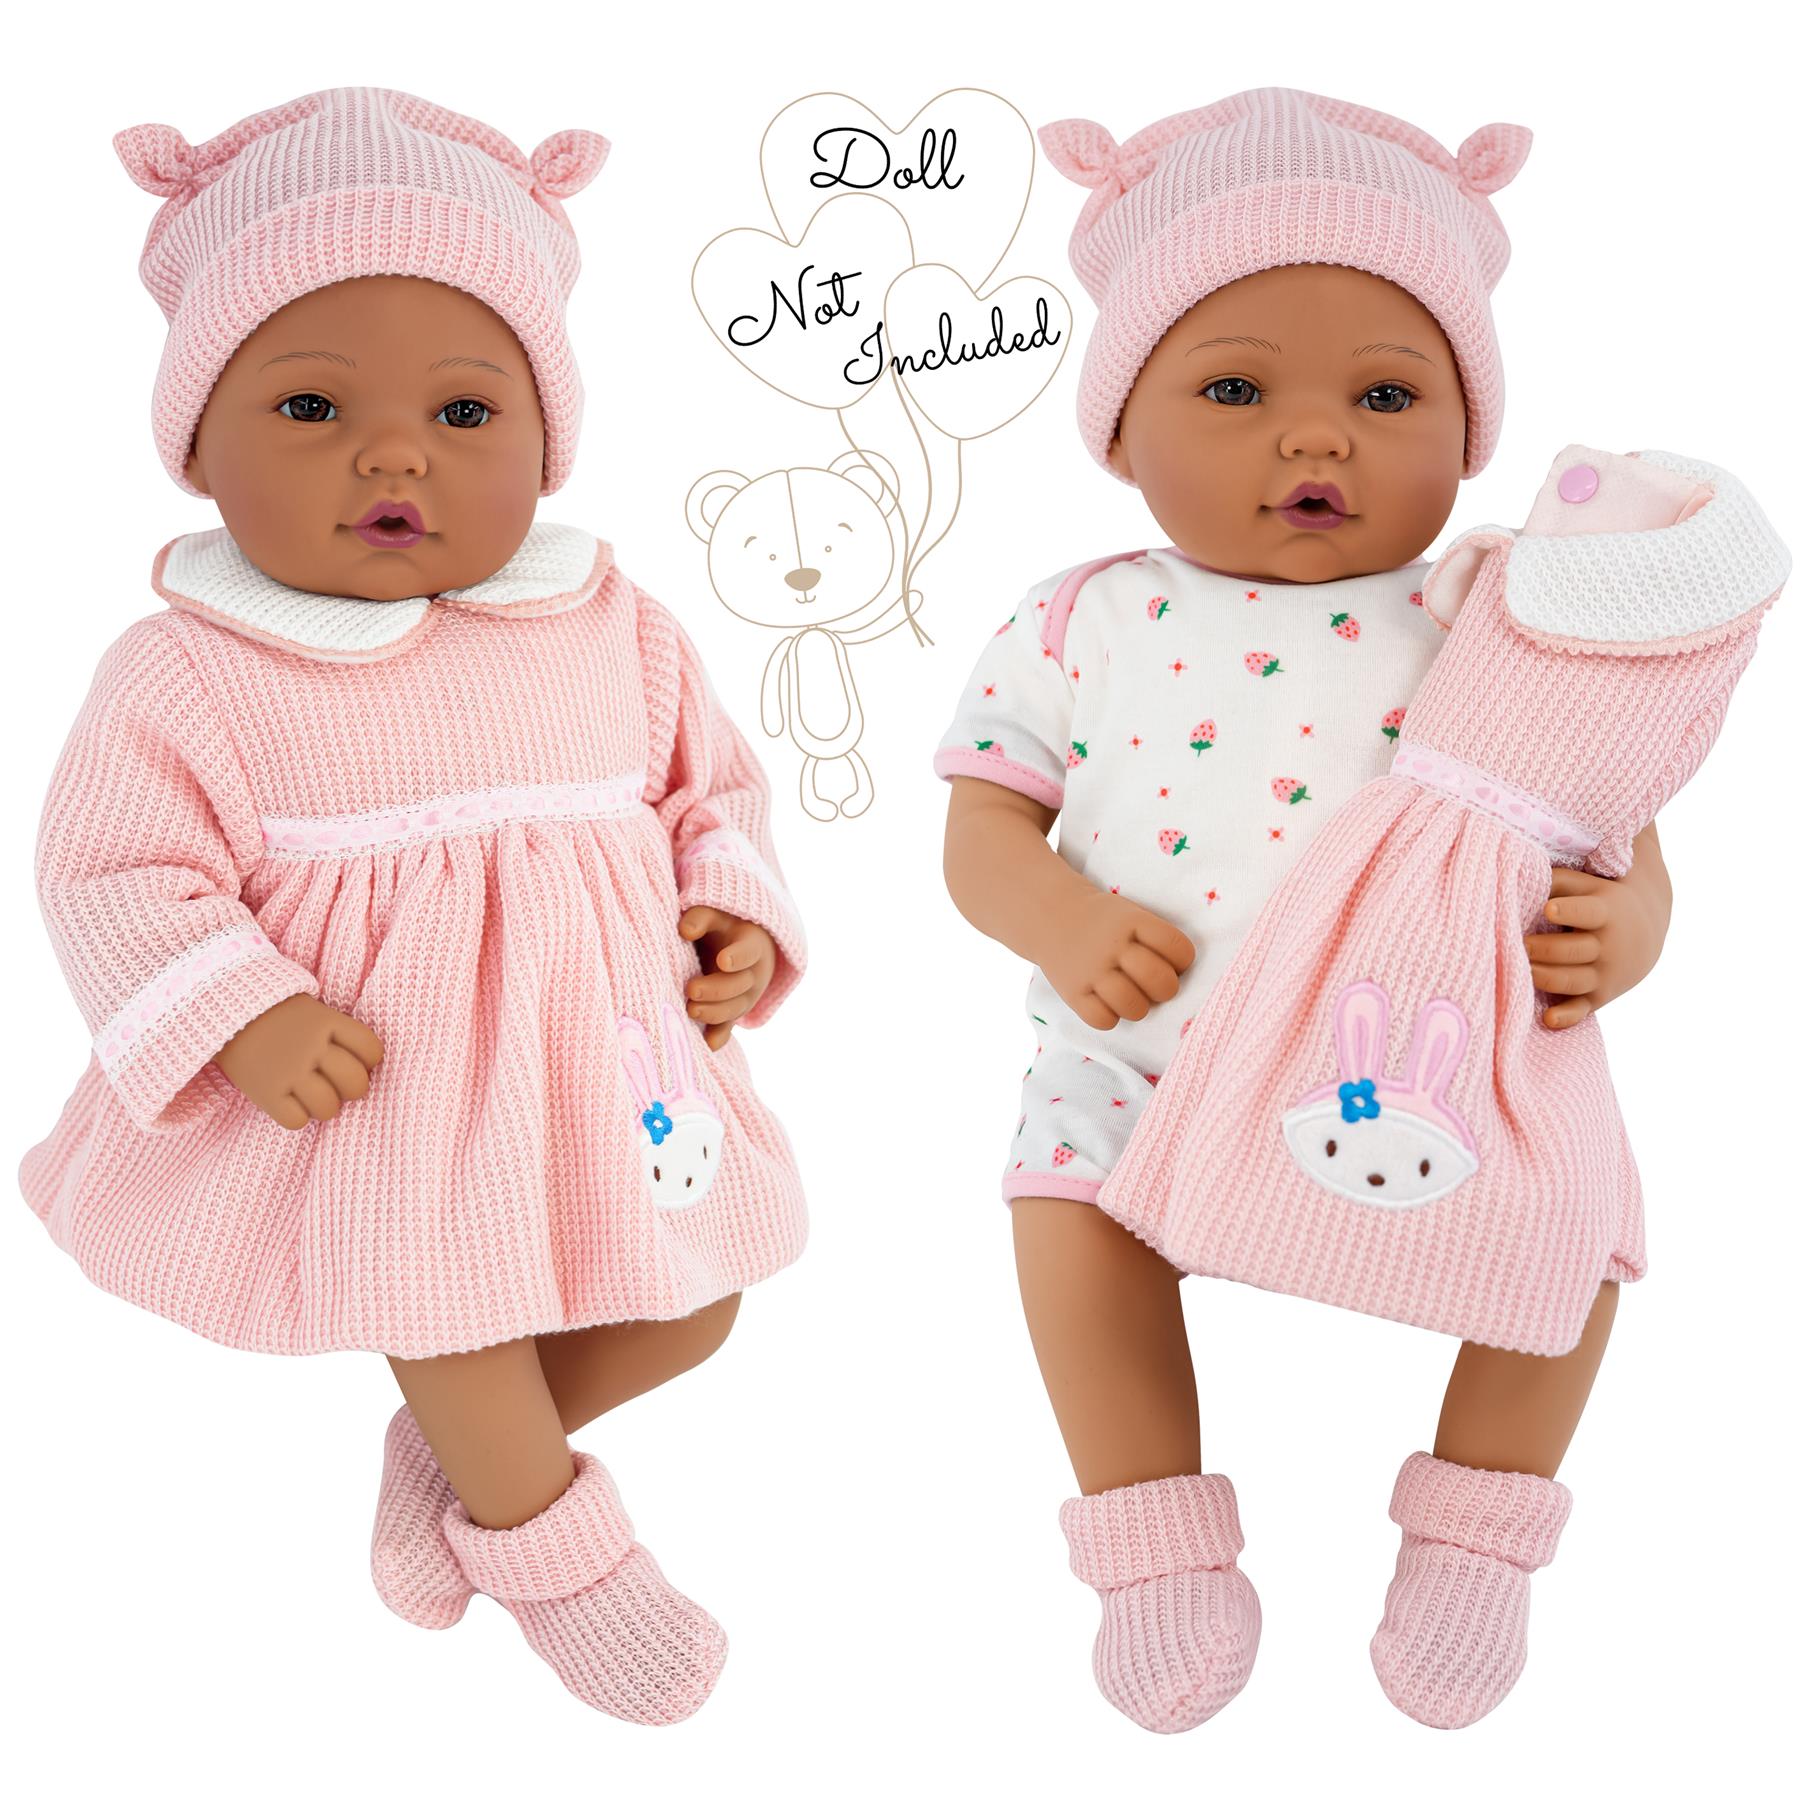 BiBi Outfits - Reborn Doll Clothes (Pink Dress) (50 cm / 20) by